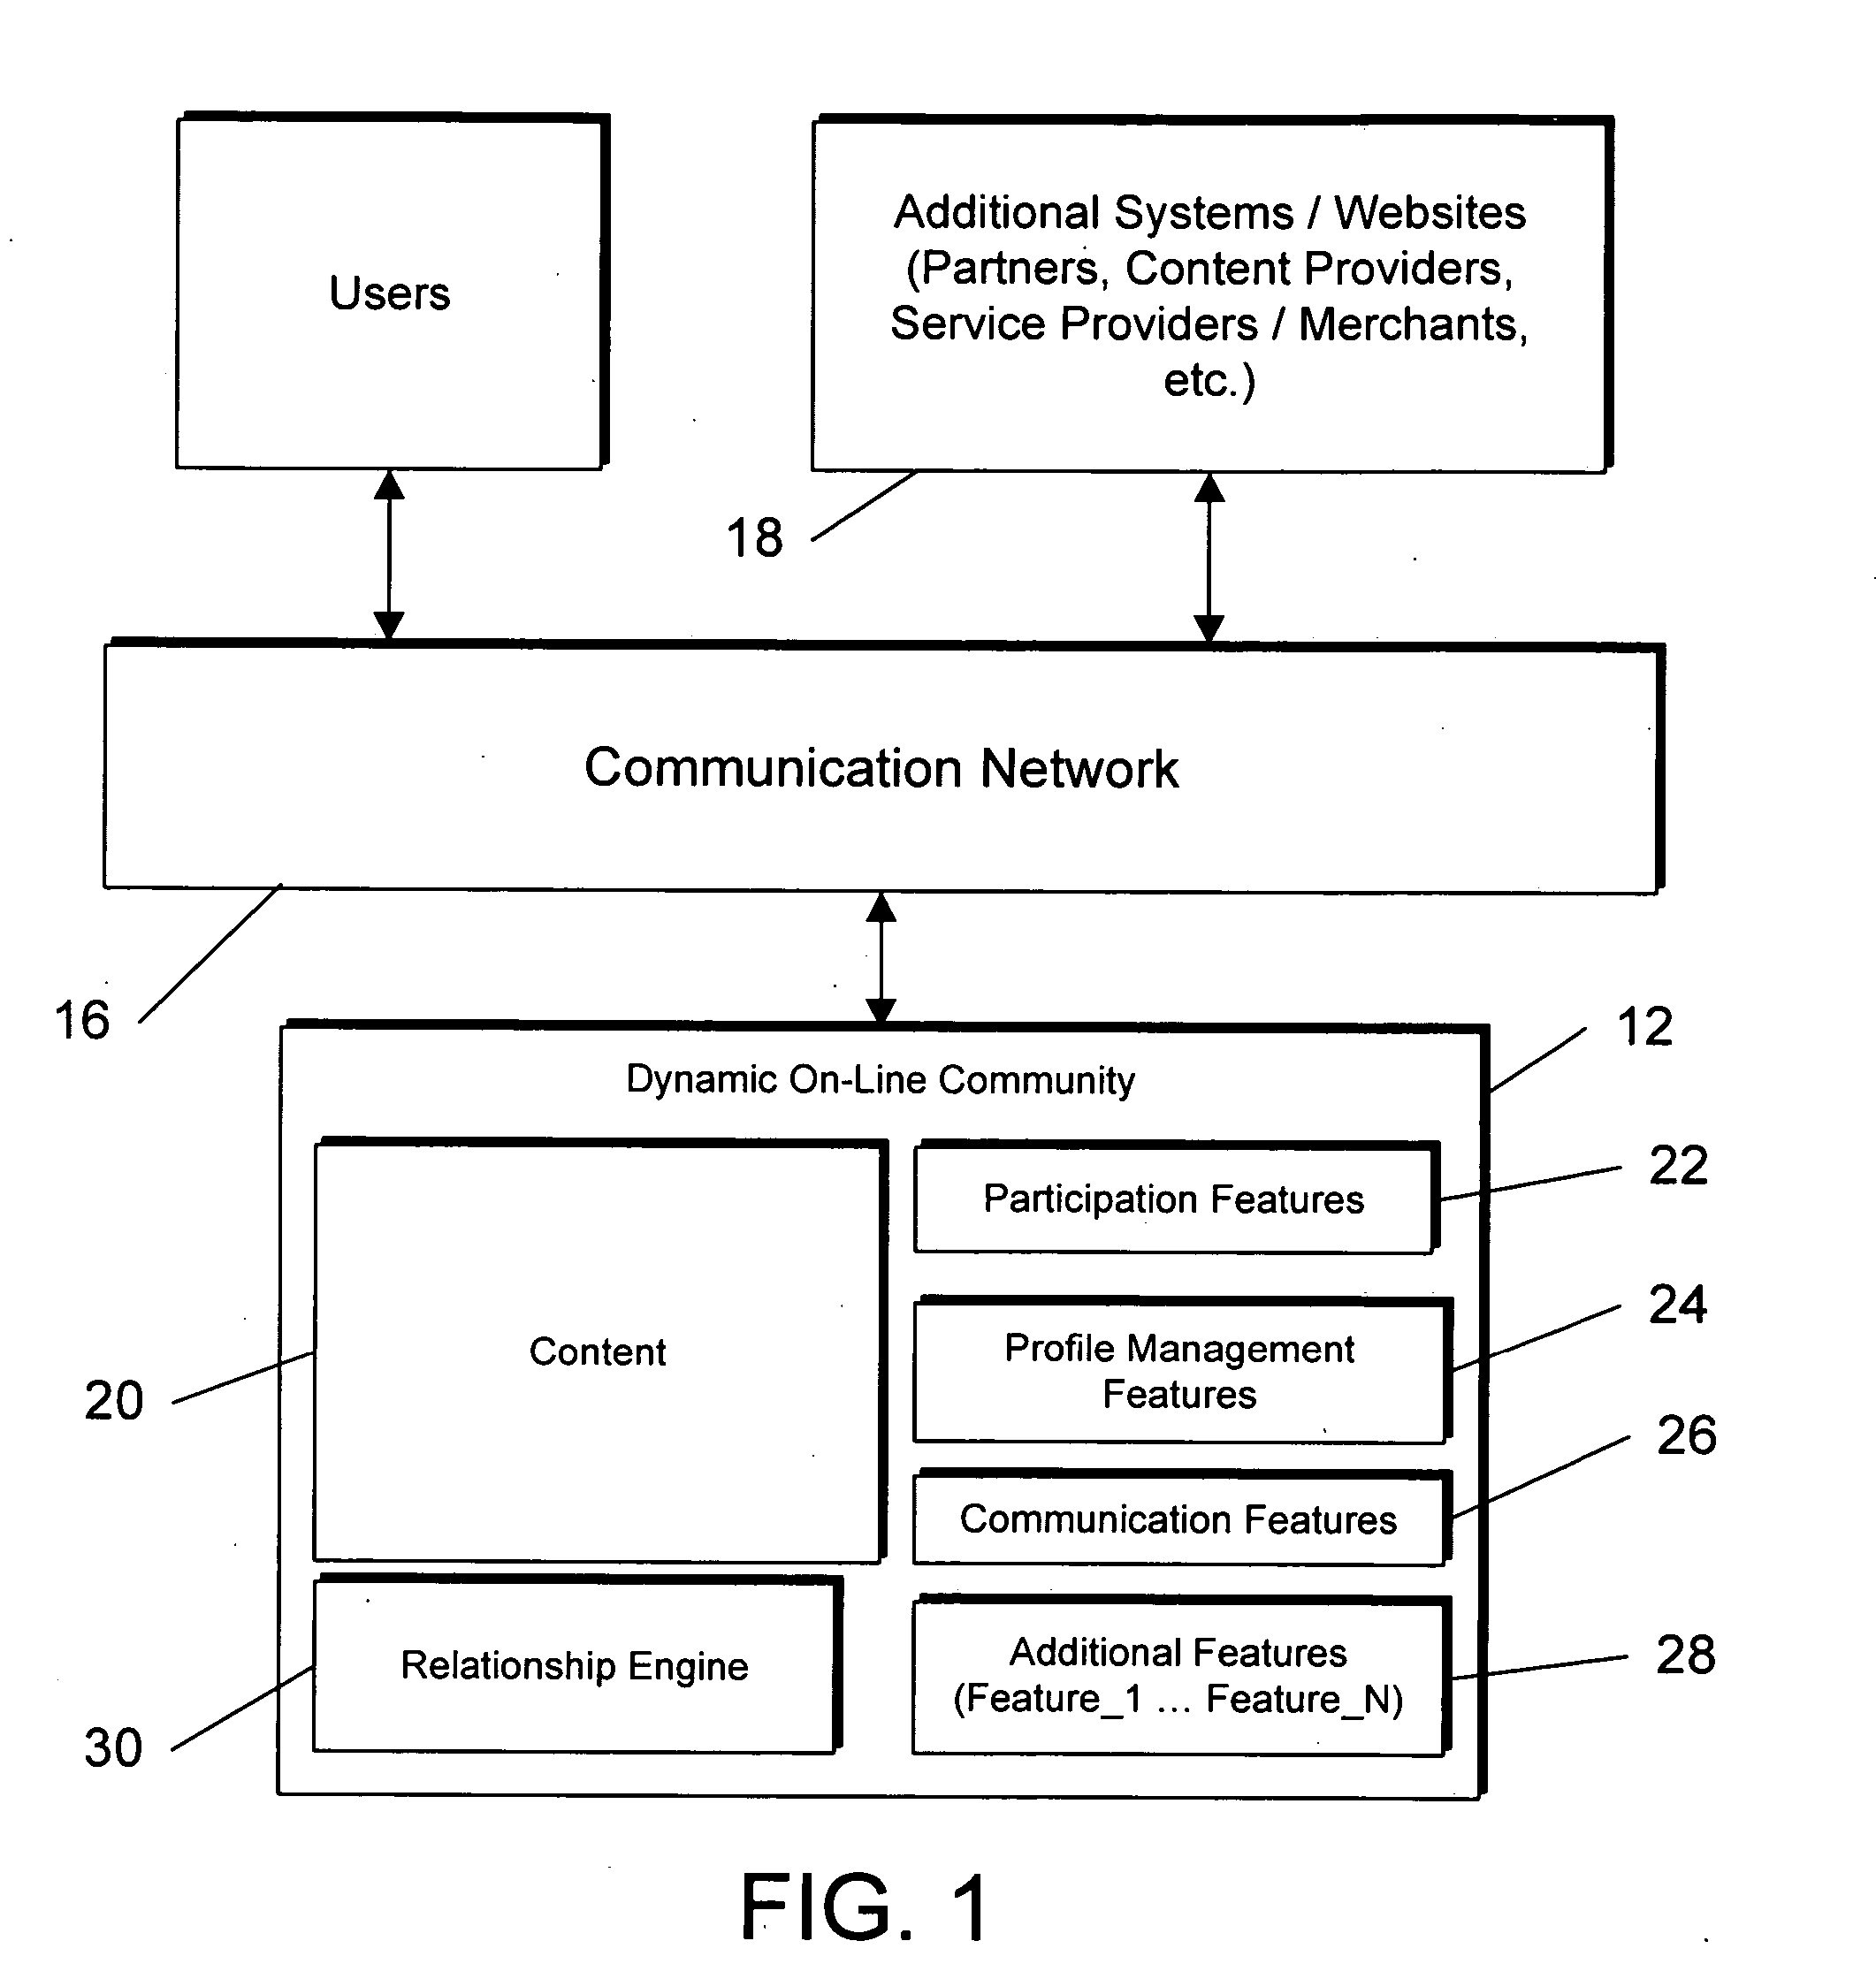 System and method for dynamically generating, maintaining, and growing an online social network